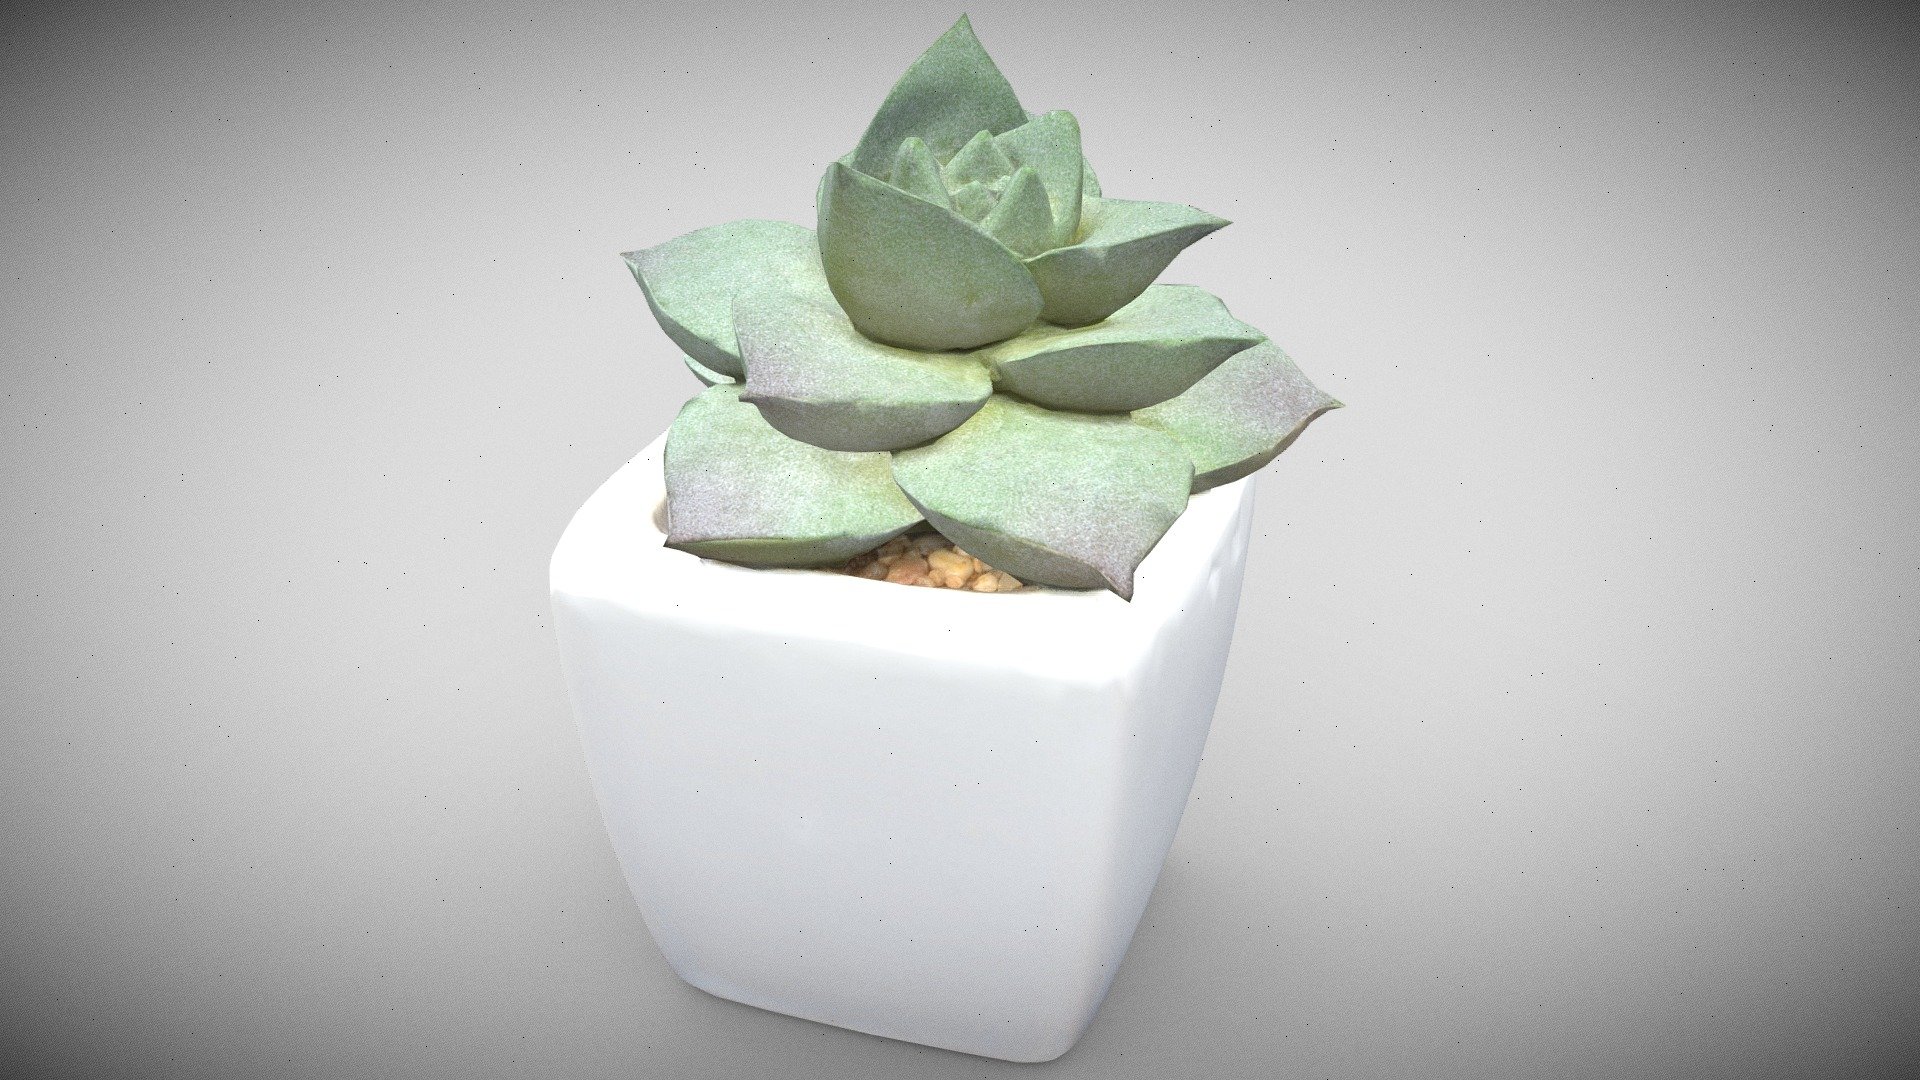 Small suculent houseplant in in small glazed pot with fine gravel.

This is a very trendy plant for desktops, offices, window sills and more. It's lovely structure and pointed, thick leaves are eyecatching.

Efficient modeling. High resolution texture, you may want to reduce the resolution if resources are scarce.

3d scan - Plant Suculent Scan - Buy Royalty Free 3D model by rdashkevicz 3d model